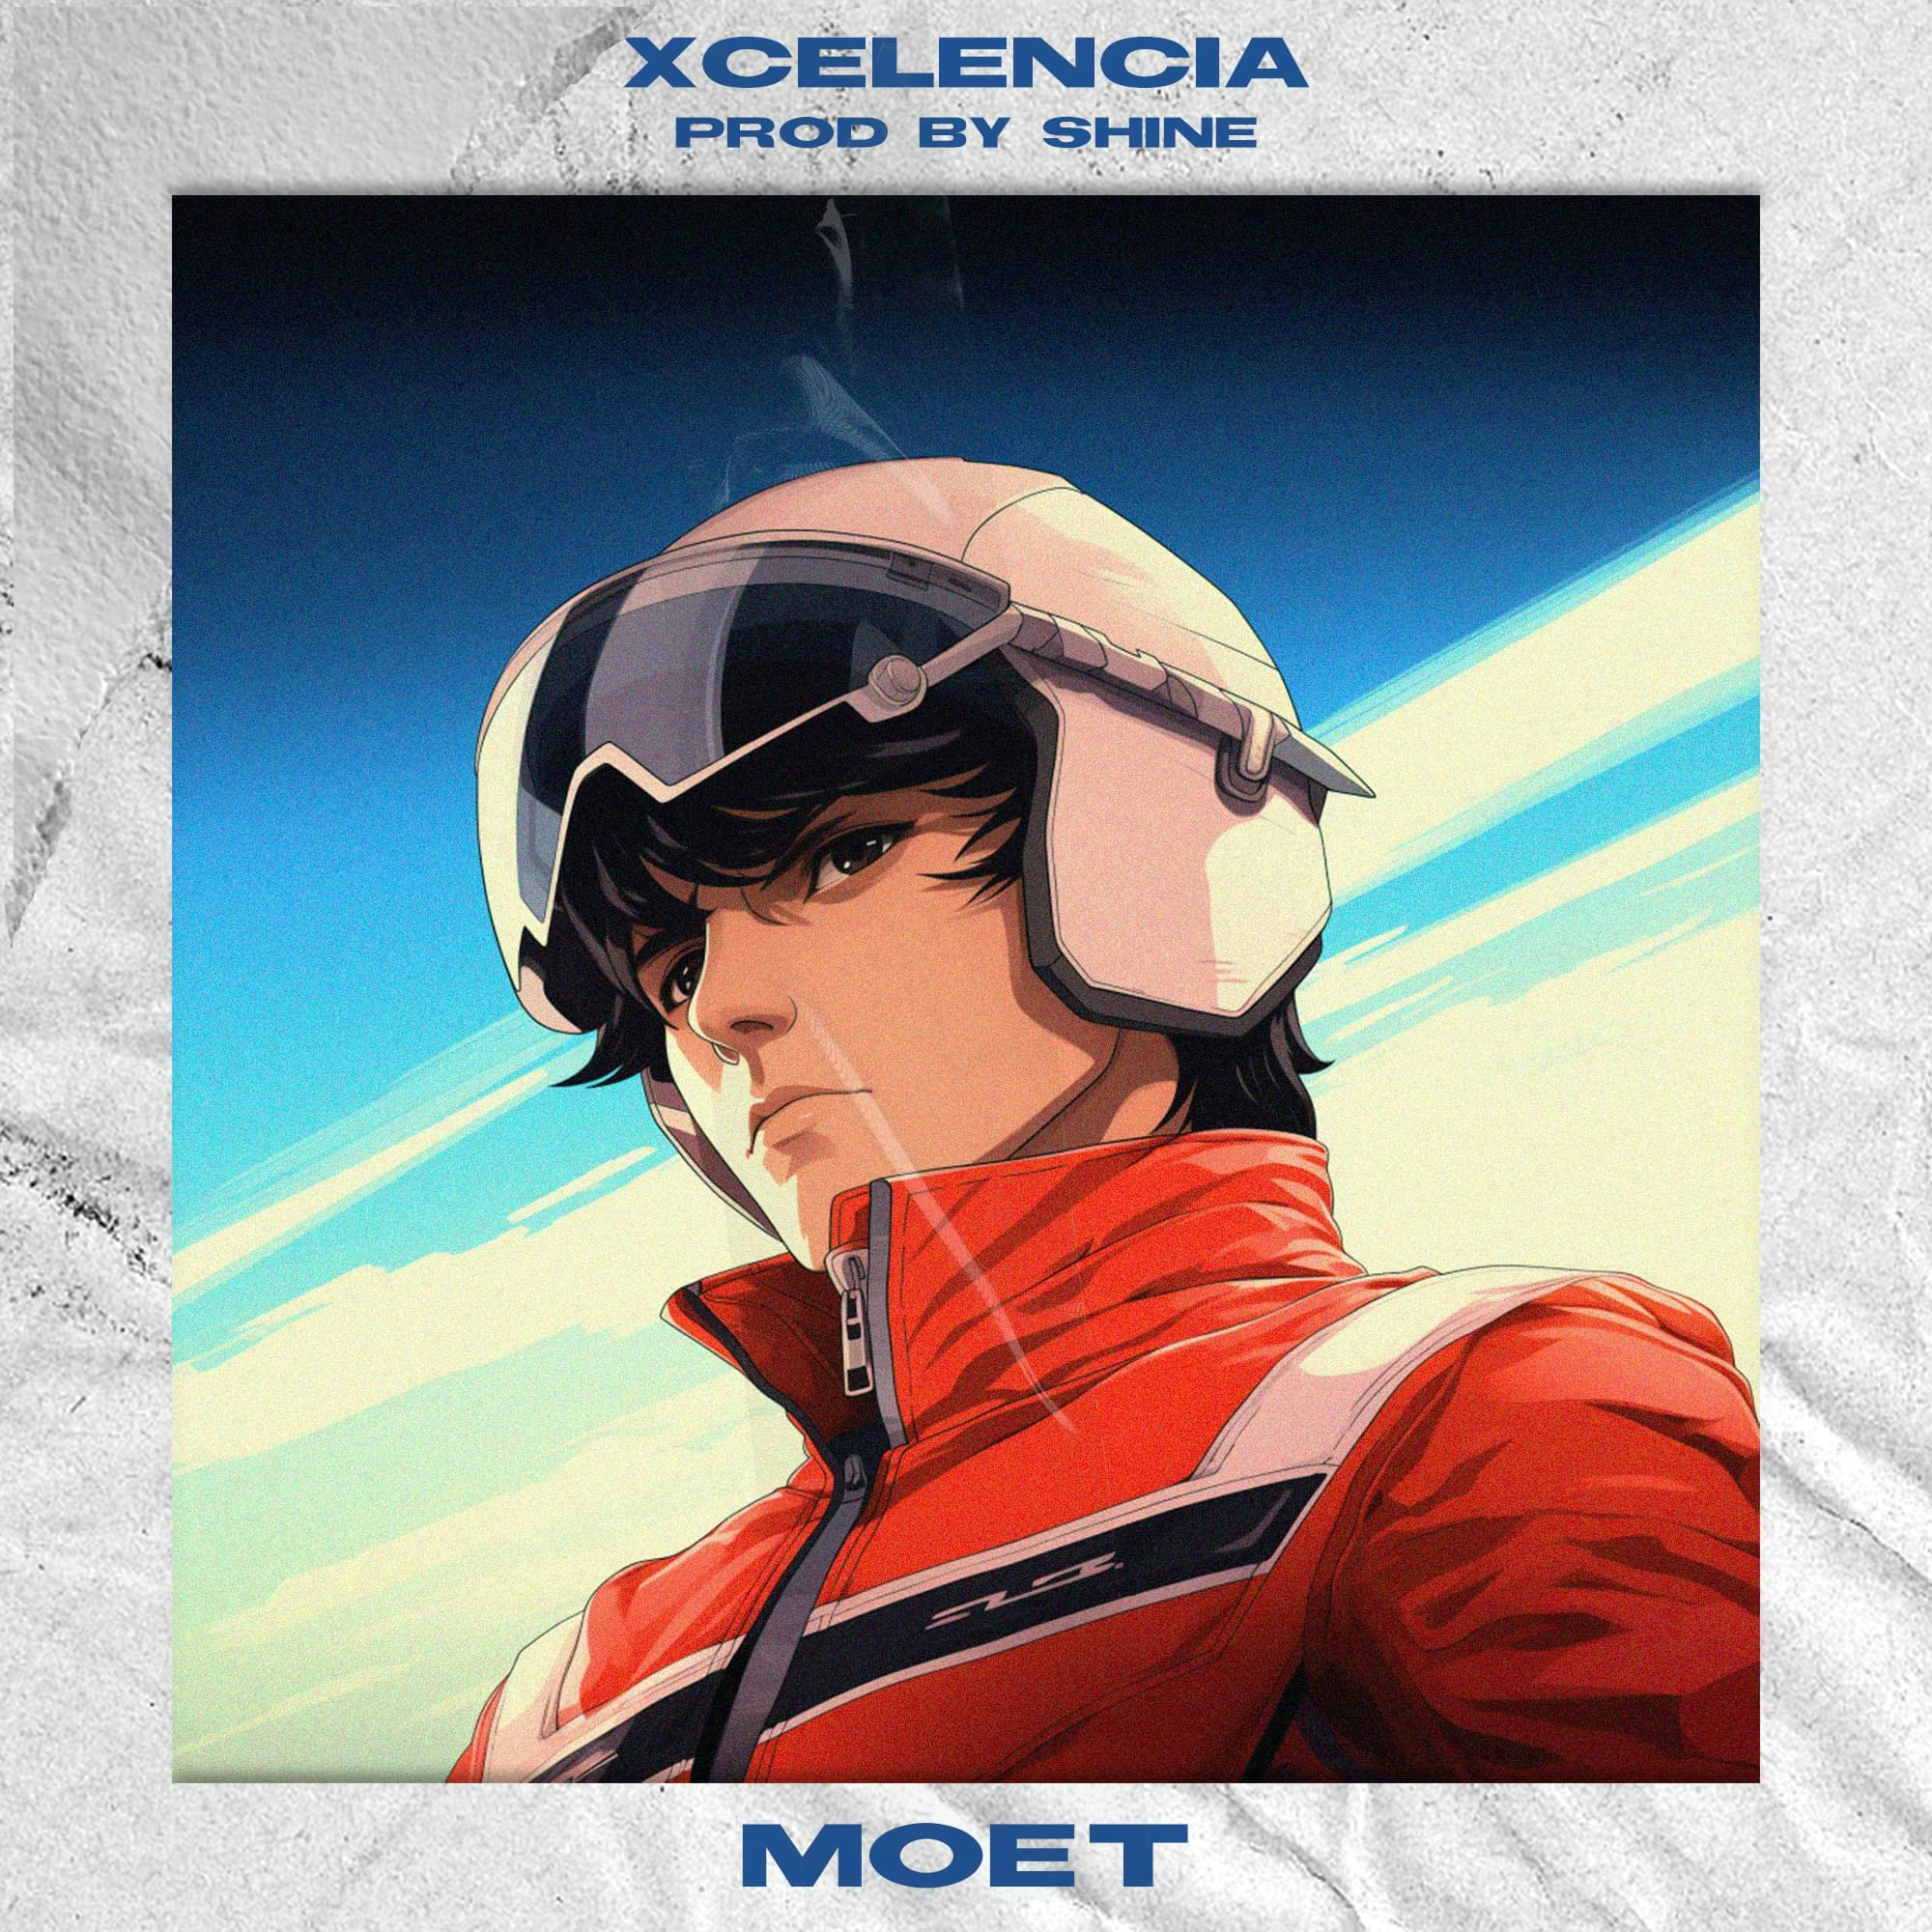 Cover art for MOET by Xcelencia